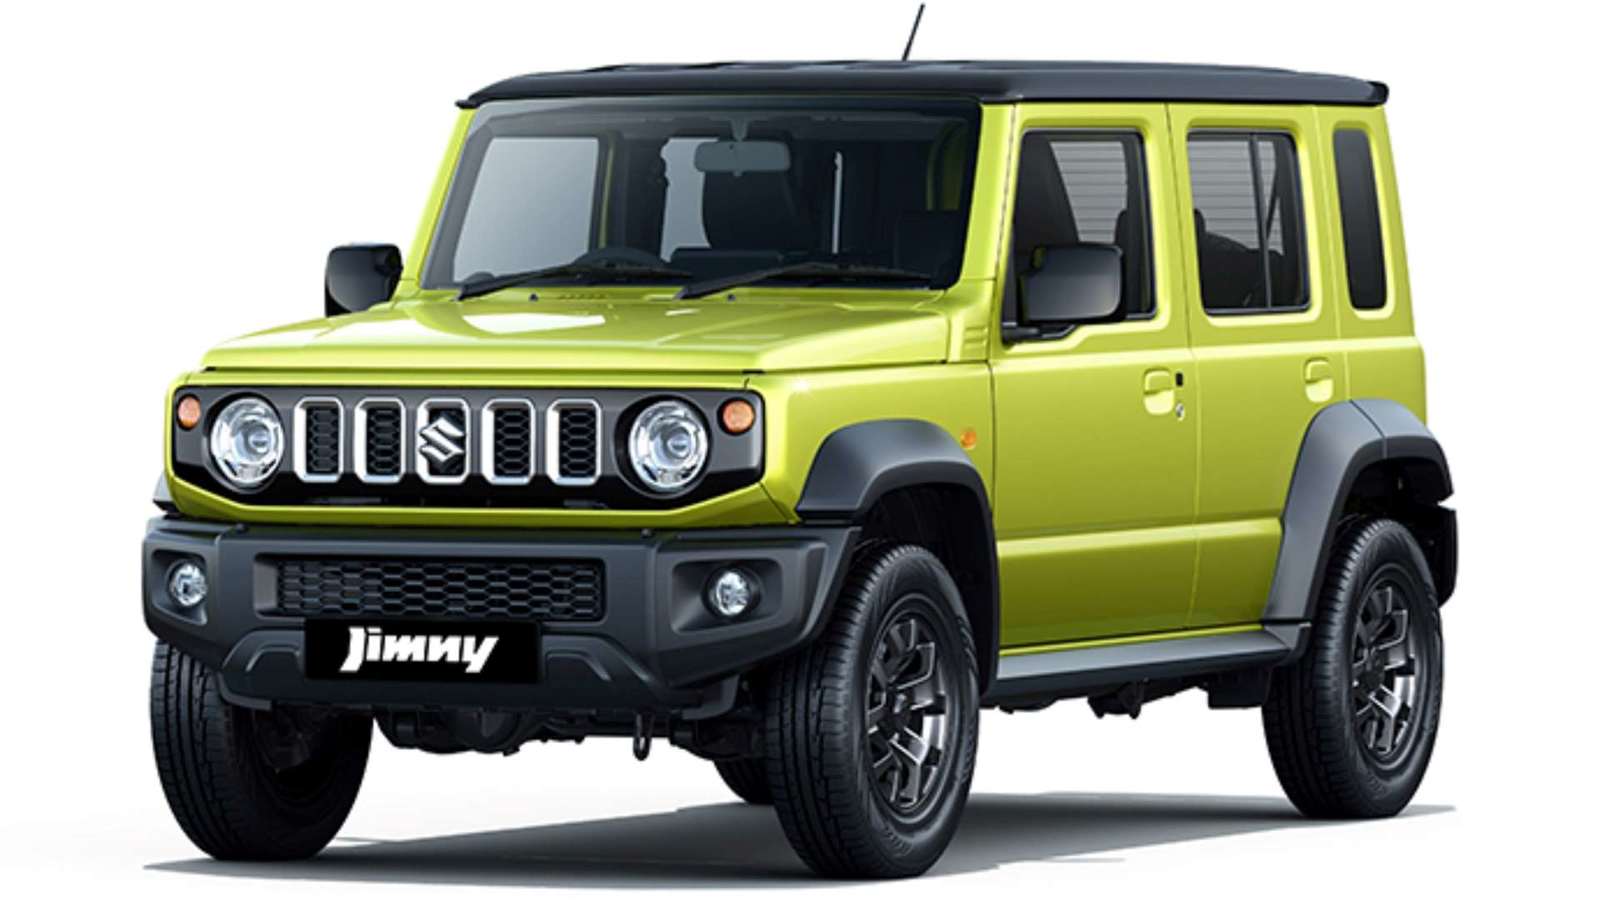 Five-door Suzuki Jimny is another cool thing we can't have